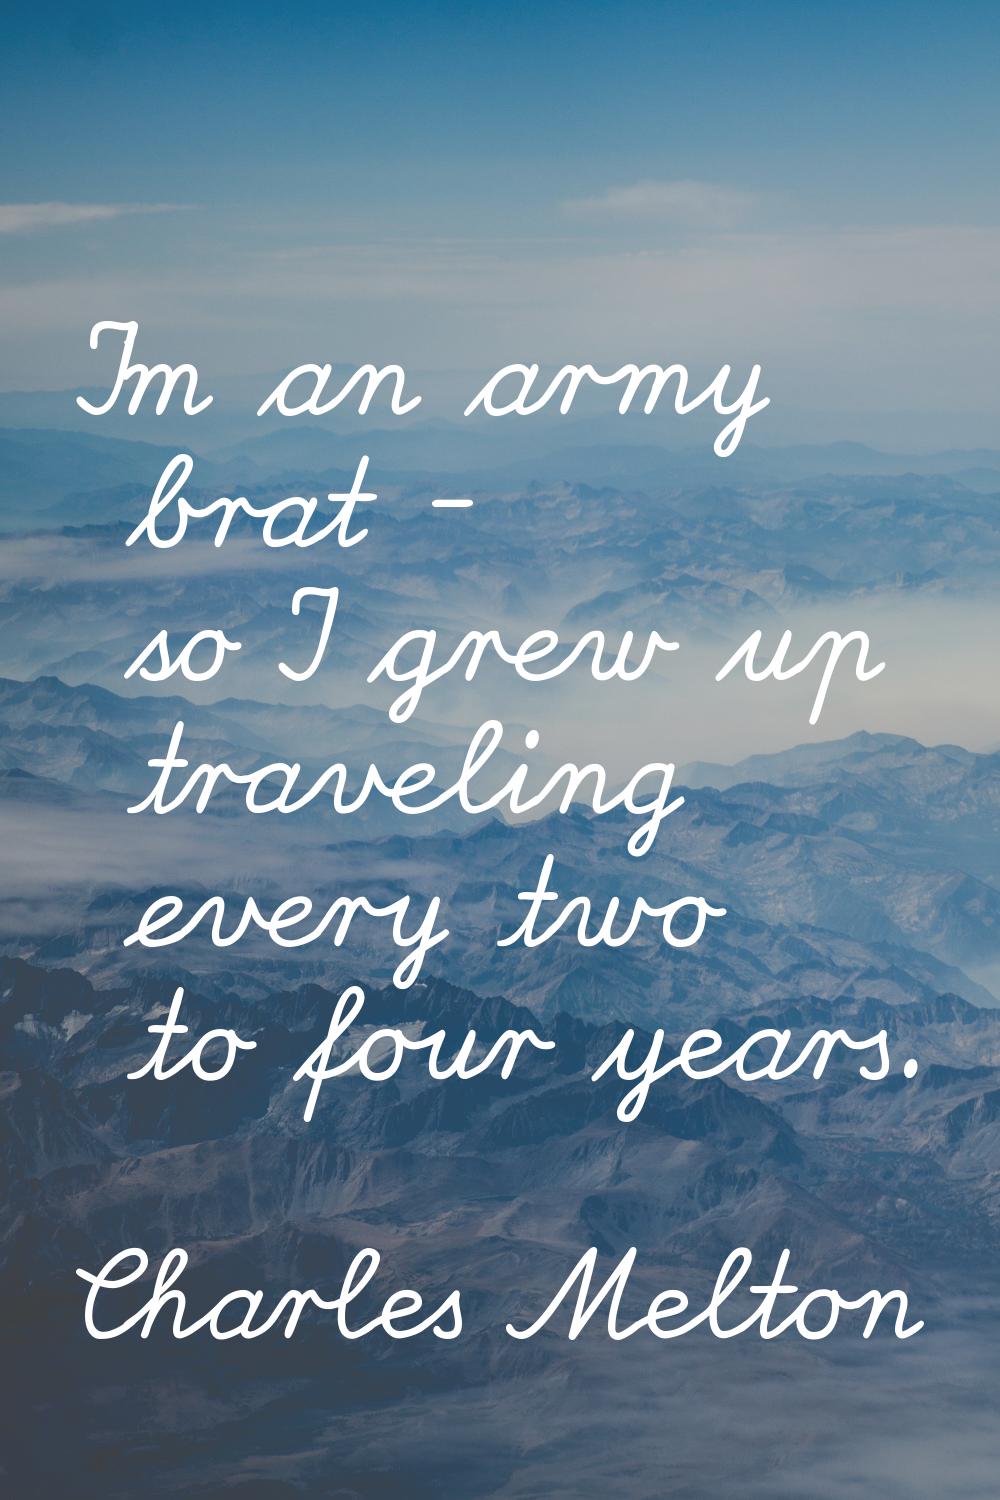 I'm an army brat - so I grew up traveling every two to four years.